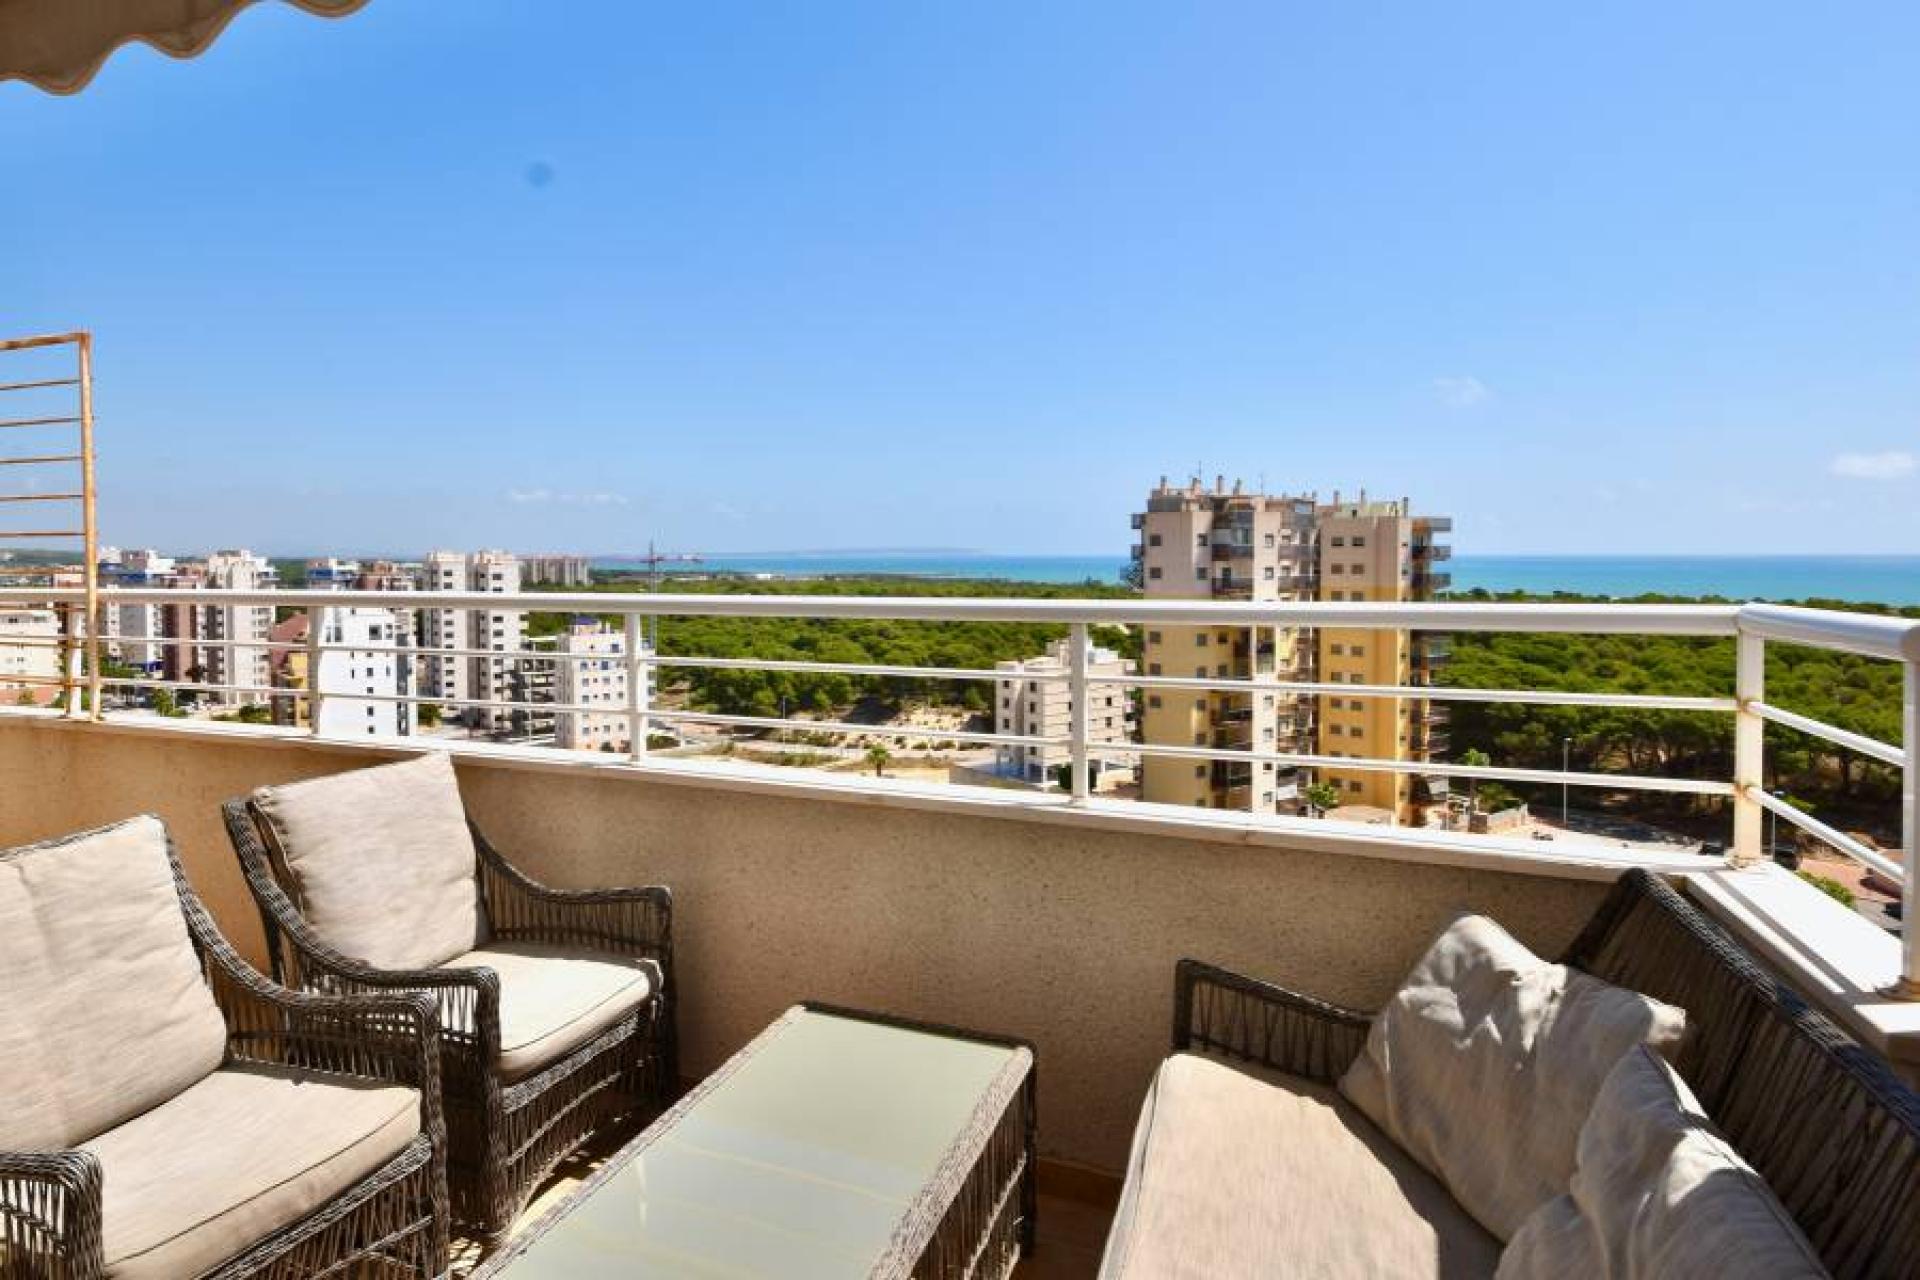 Guardamar, Penthouse with 3 Bedrooms 2 Bathrooms, 15m2 terrace and 24m2 private solarium